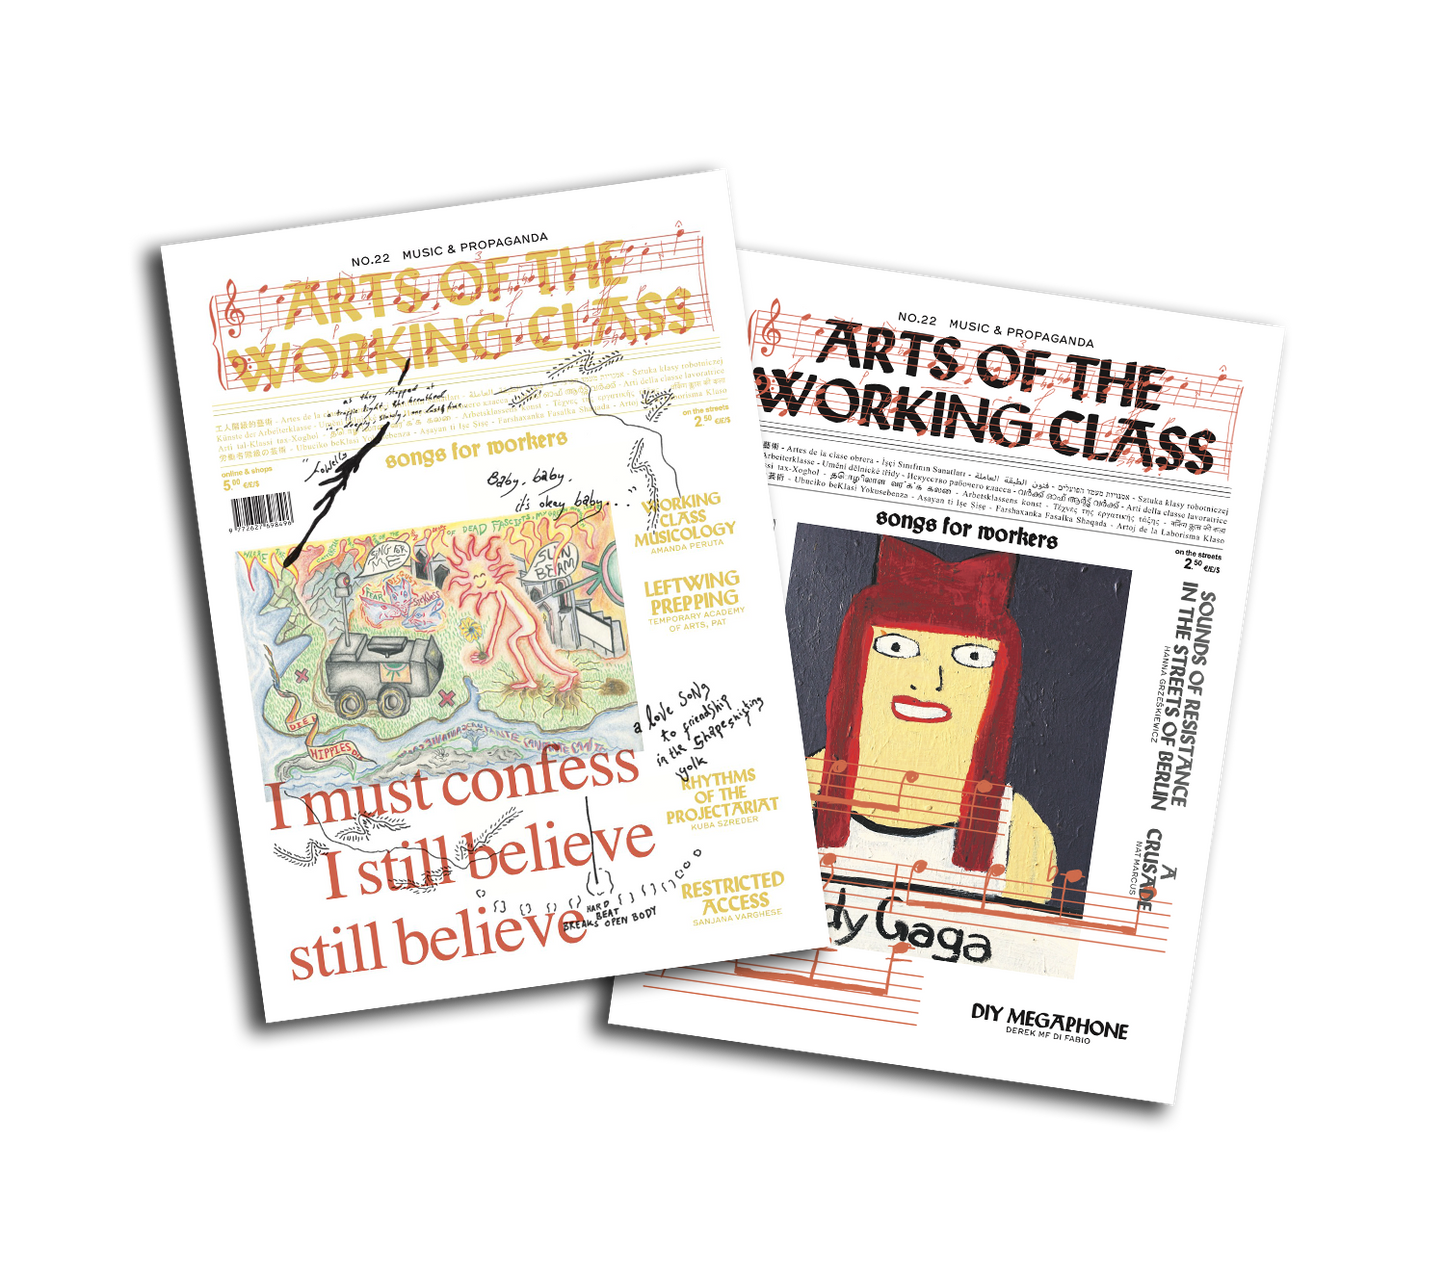 ISSUE 22: SONGS FOR WORKERS